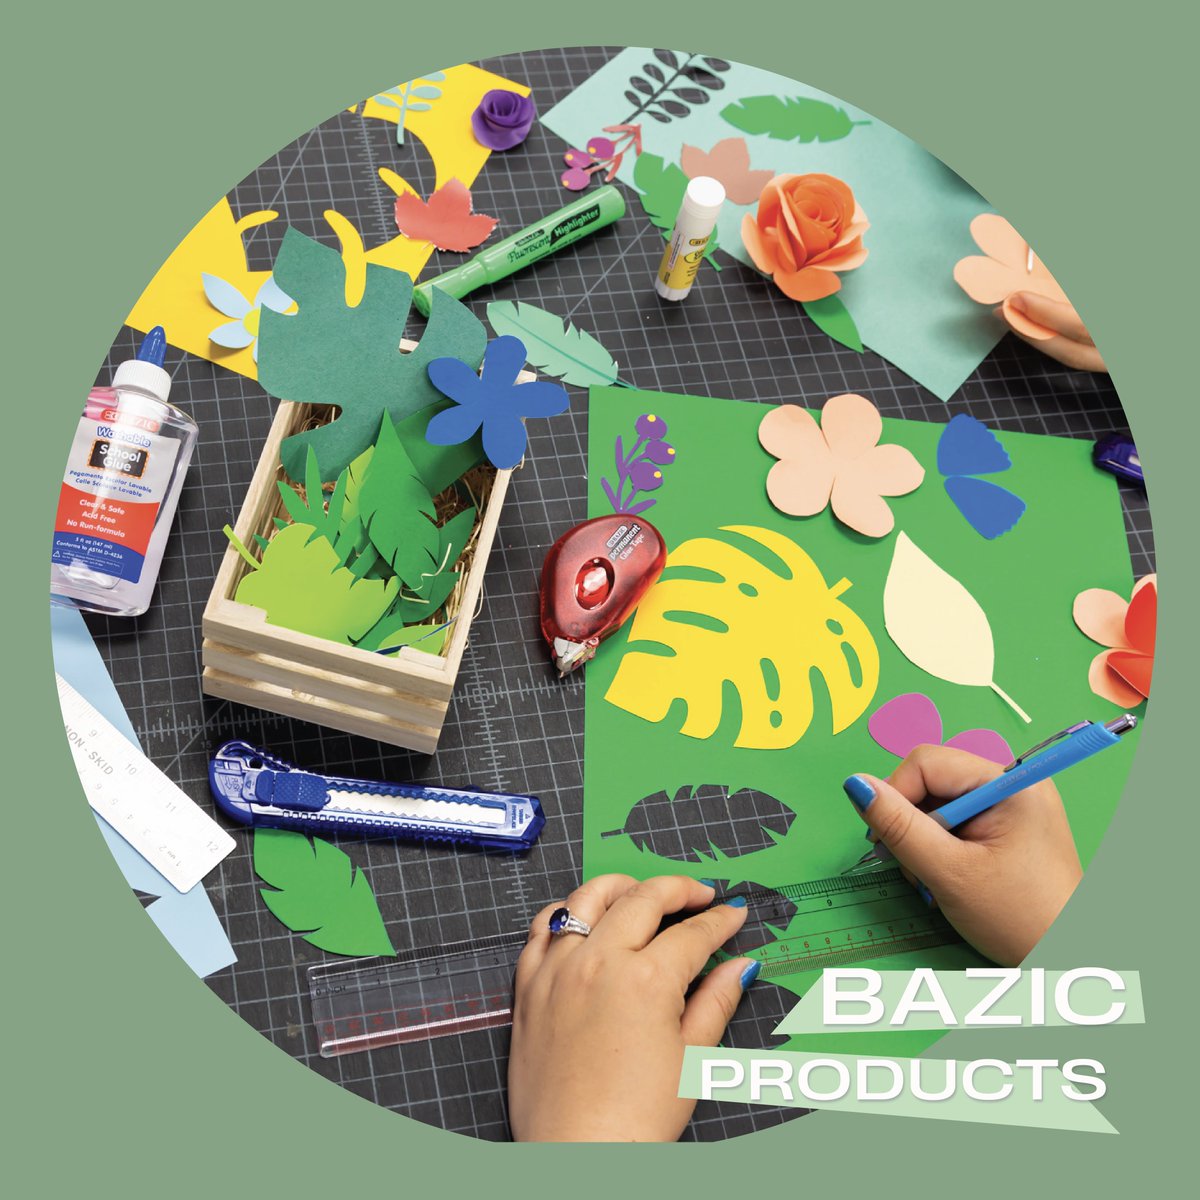 Celebrate Screen-Free Week with BAZIC Products and create something with our Construction Paper! Check the link in our bio for the link to our blog for even more crafting ideas! Shop now at bazicstore.com for all your art supplies! 🎨